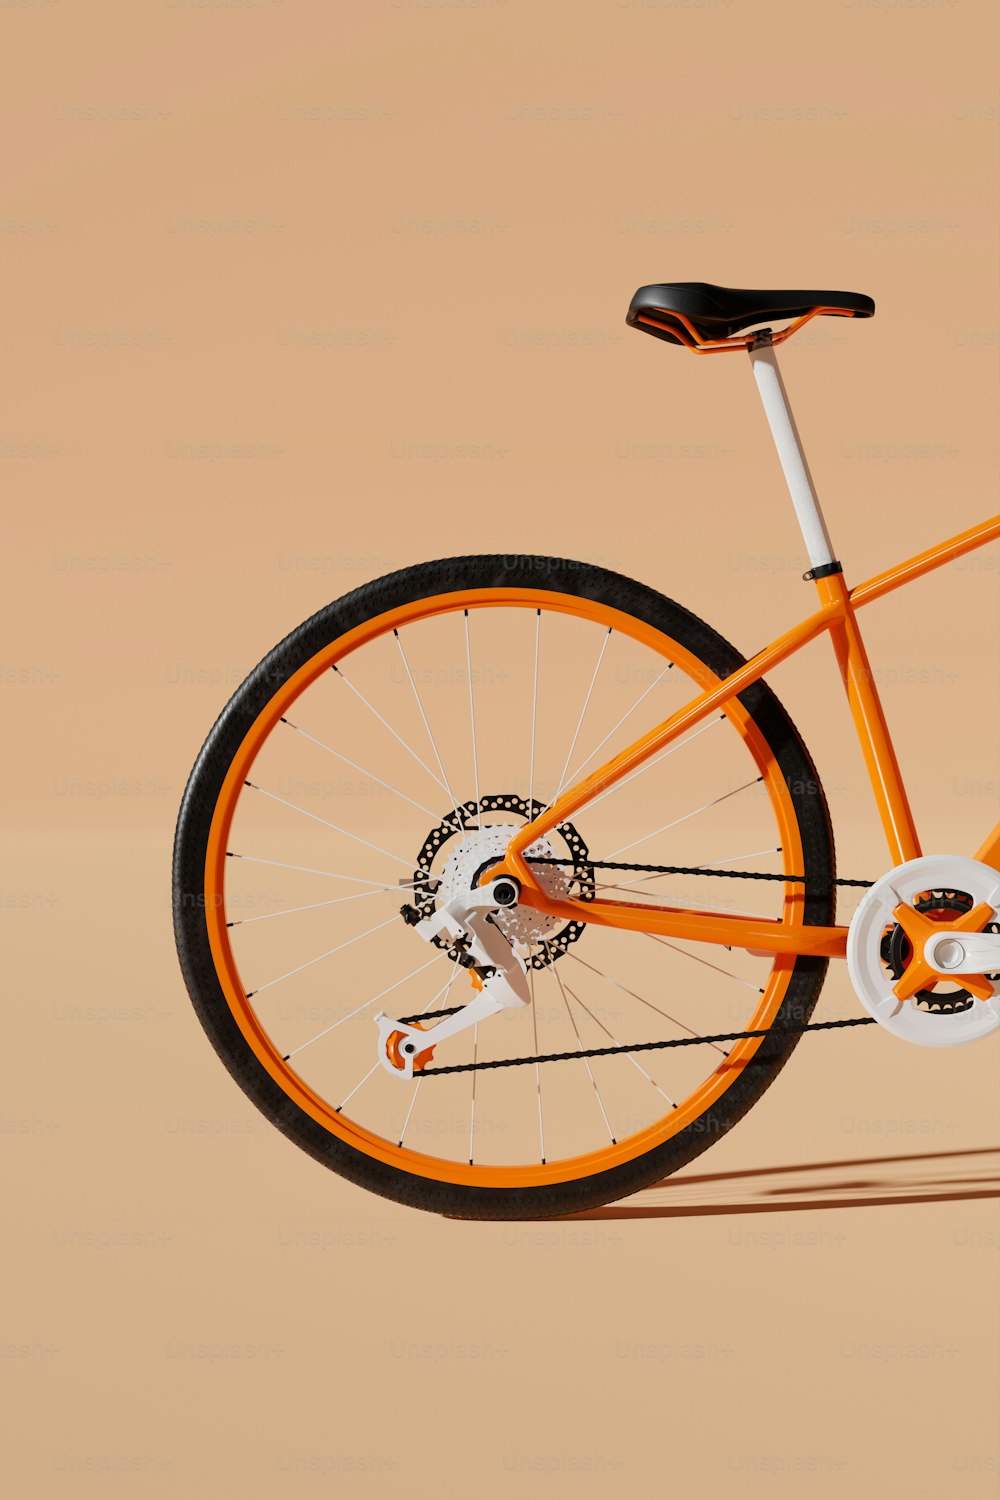 an orange and white bike is shown against a tan background